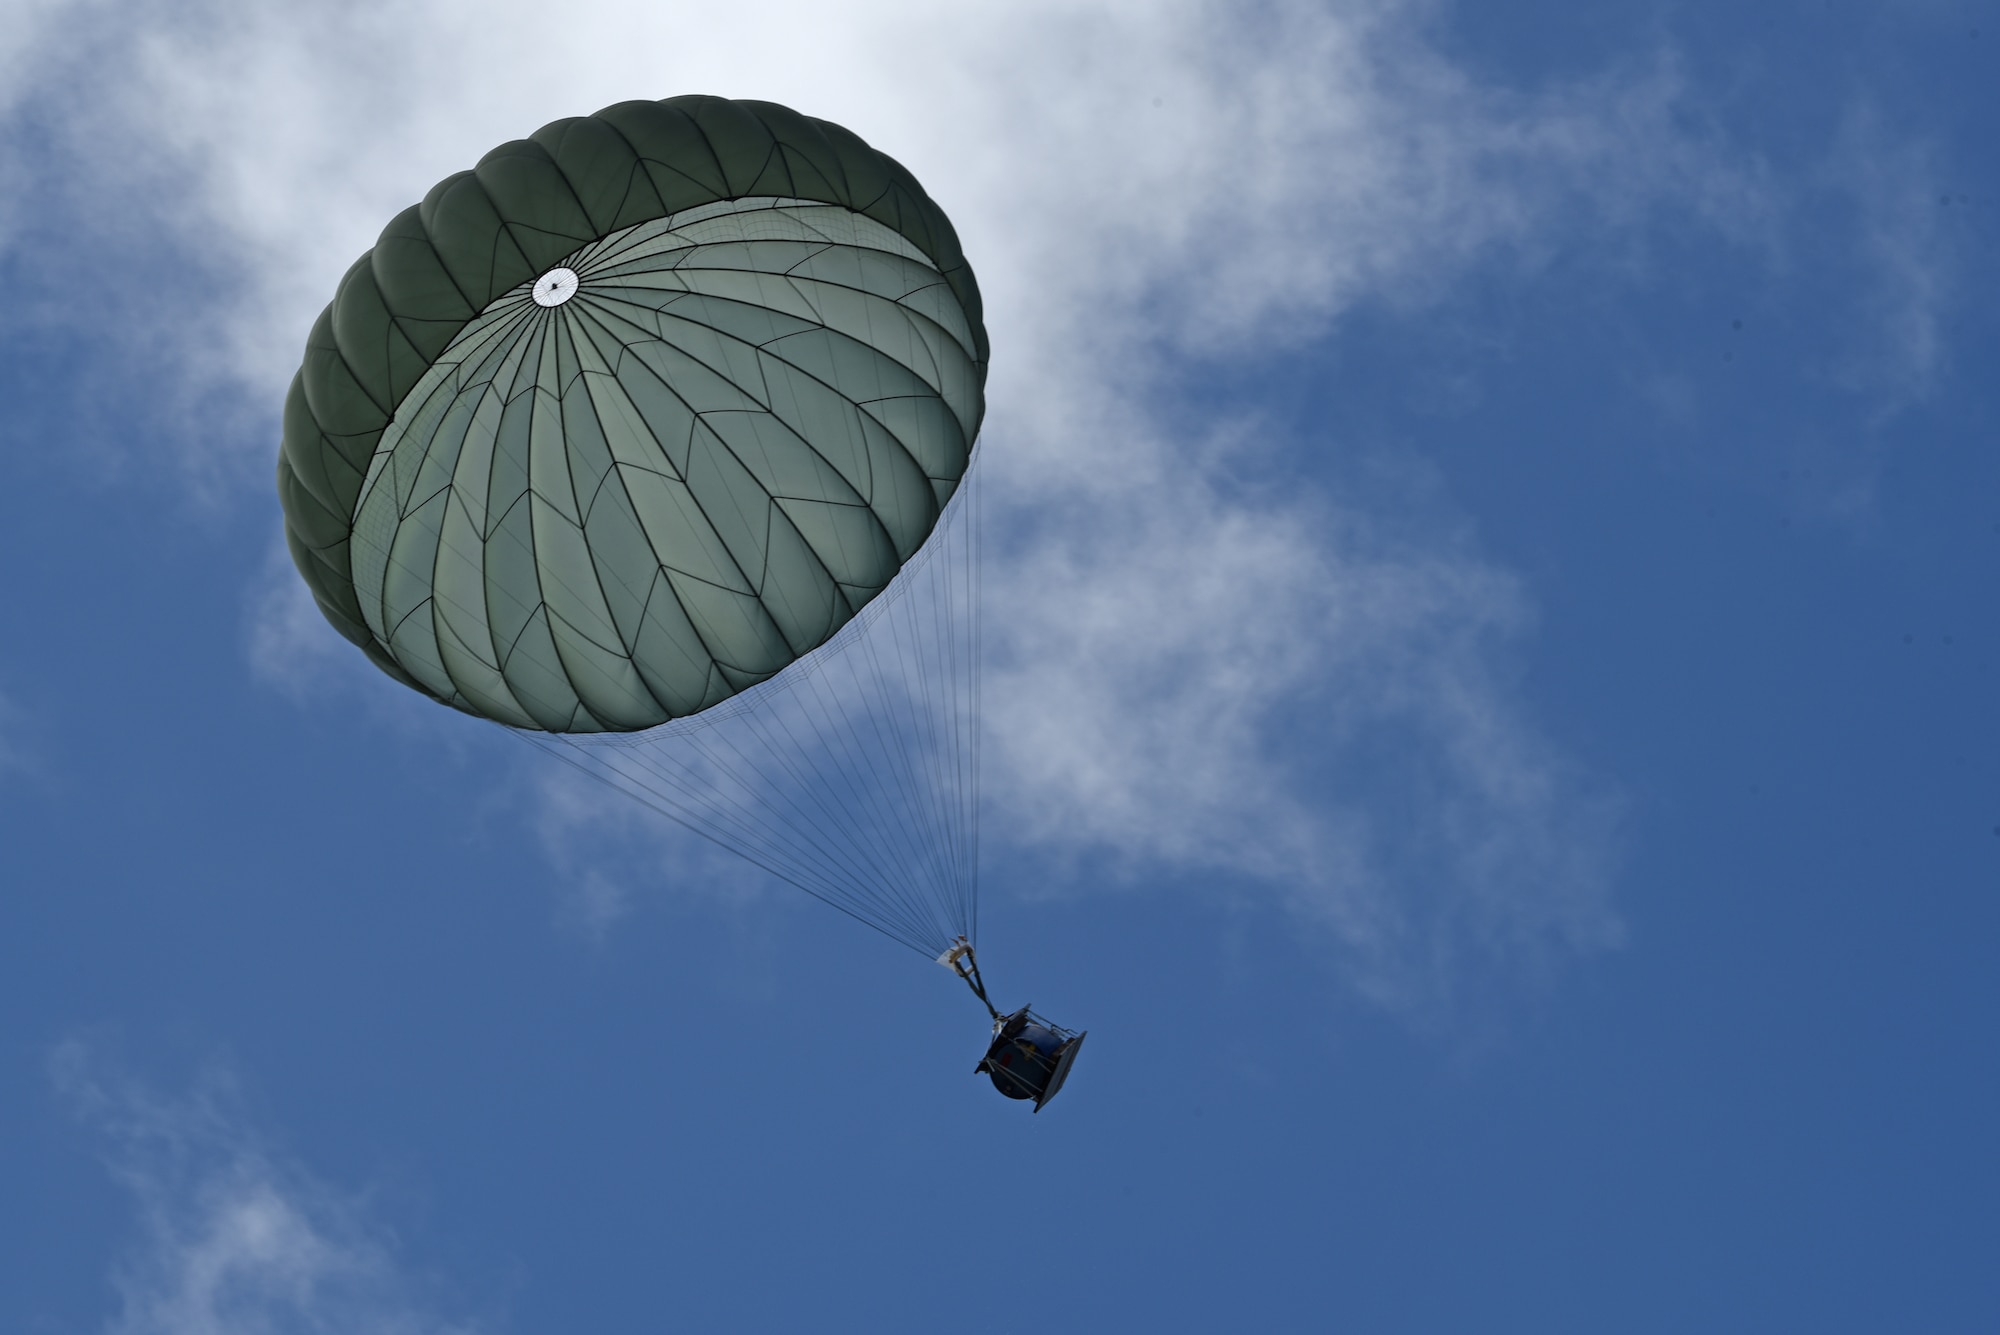 A water barrel falls after being airdropped by a Japan Air Self-Defense Force C-130 Hercules during Exercise Cope North 17 at North Field, Tinian, Feb. 22, 2017. The exercise includes 22 total flying units and more than 2,700 personnel from three countries and continues the growth of strong, interoperable relationships within the Indo-Asia-Pacific region through integration of airborne and land-based command and control (U.S. Air Force photo by Airman 1st Class Jacob Skovo).